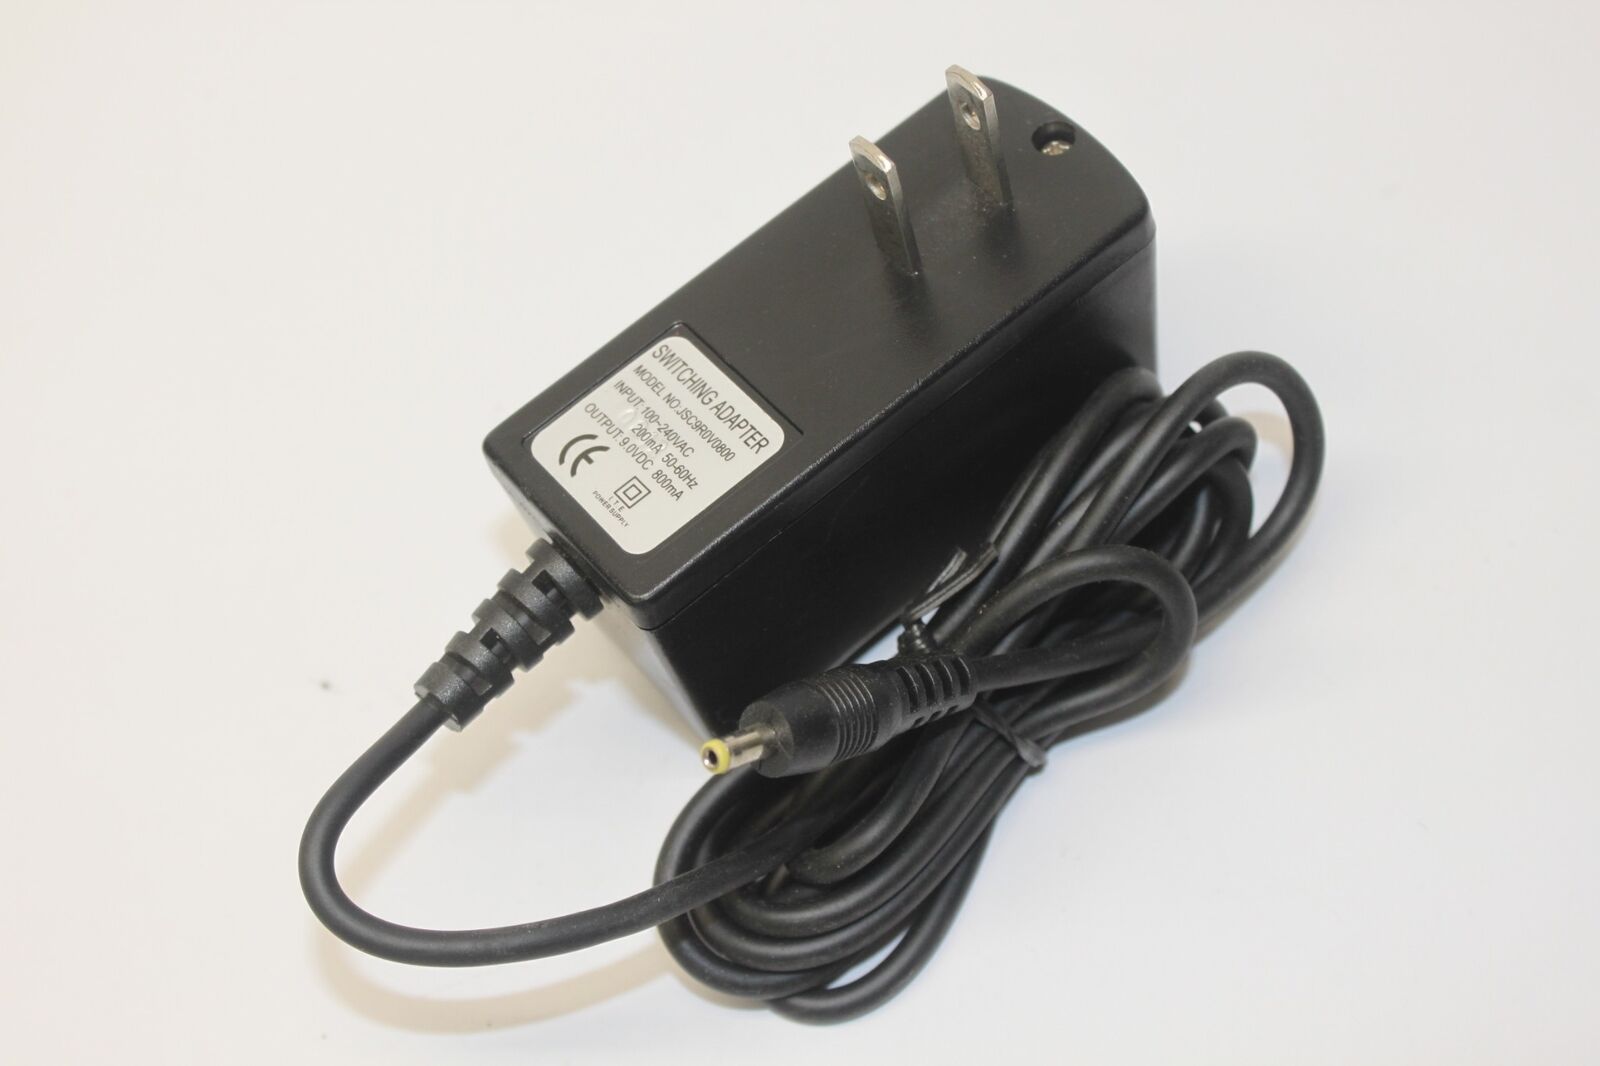 New 9V 800mA JSC9R0V0800 Switching Power Supply Ac Adapter